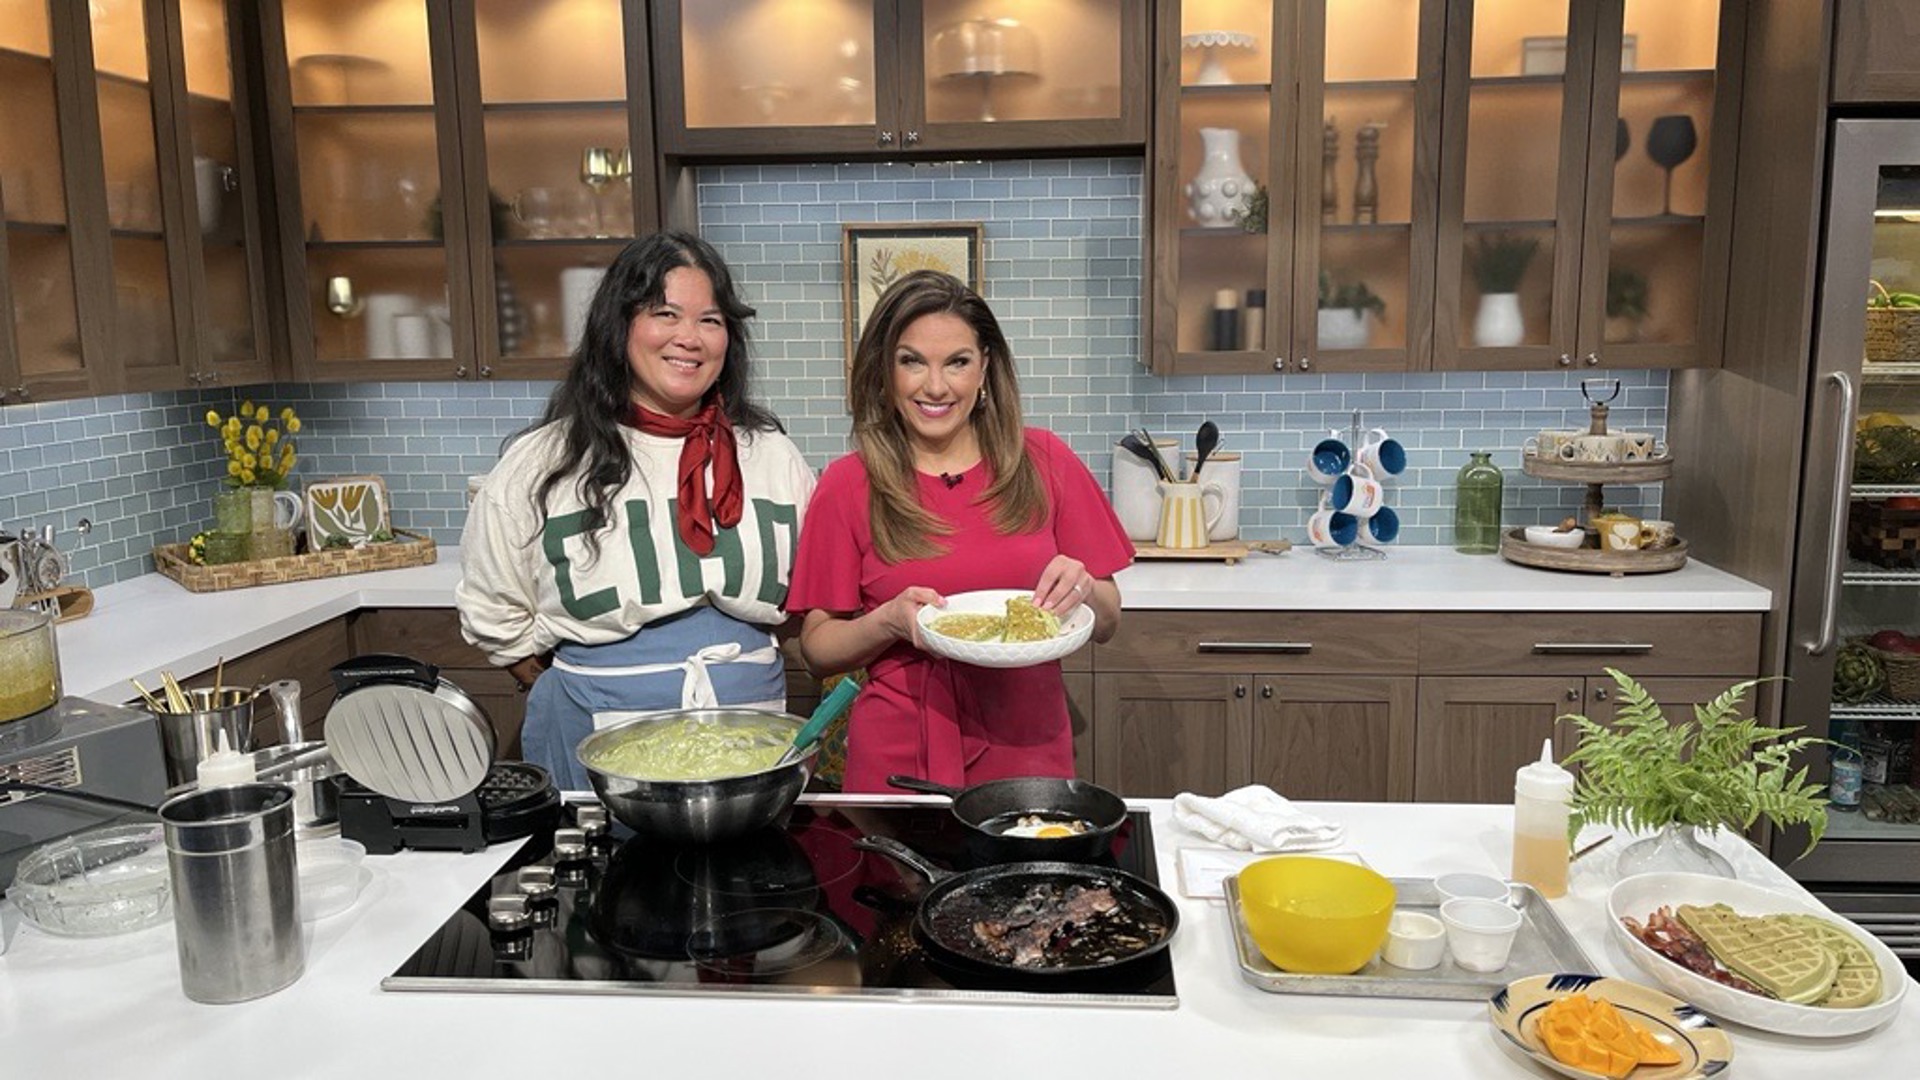 Tacoma’s Jan Parker competes on the Food Network show "Ciao House" in Italy. #newdaynw